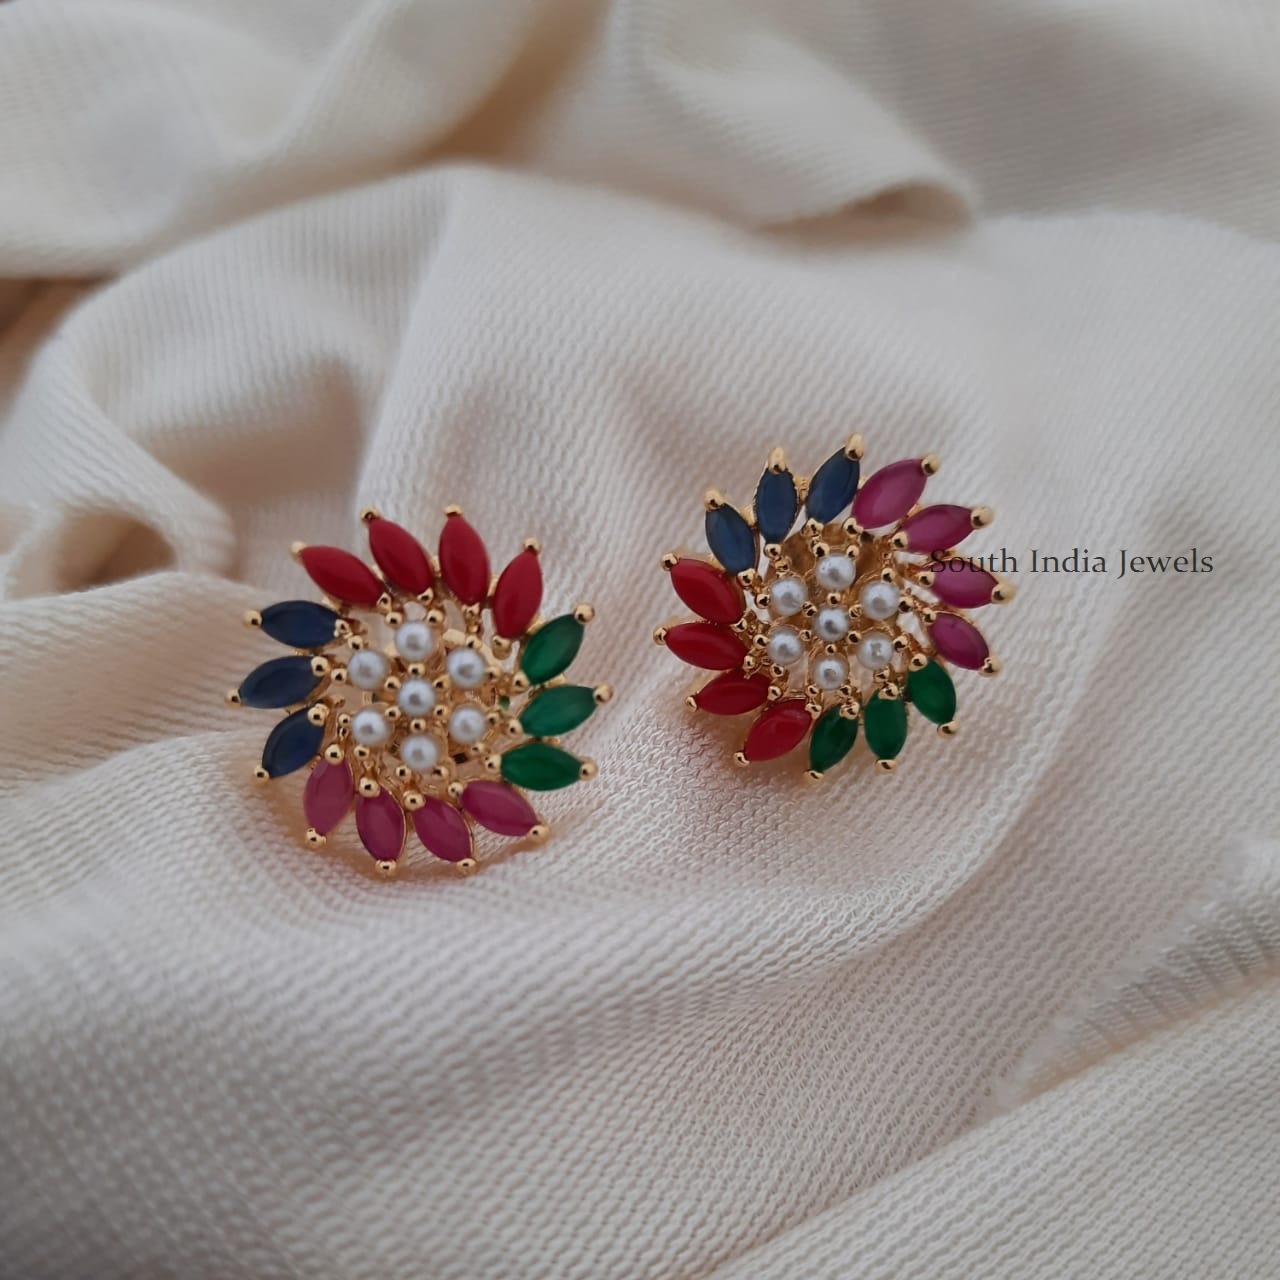 Gorgeous Multi Color Stone Earrings